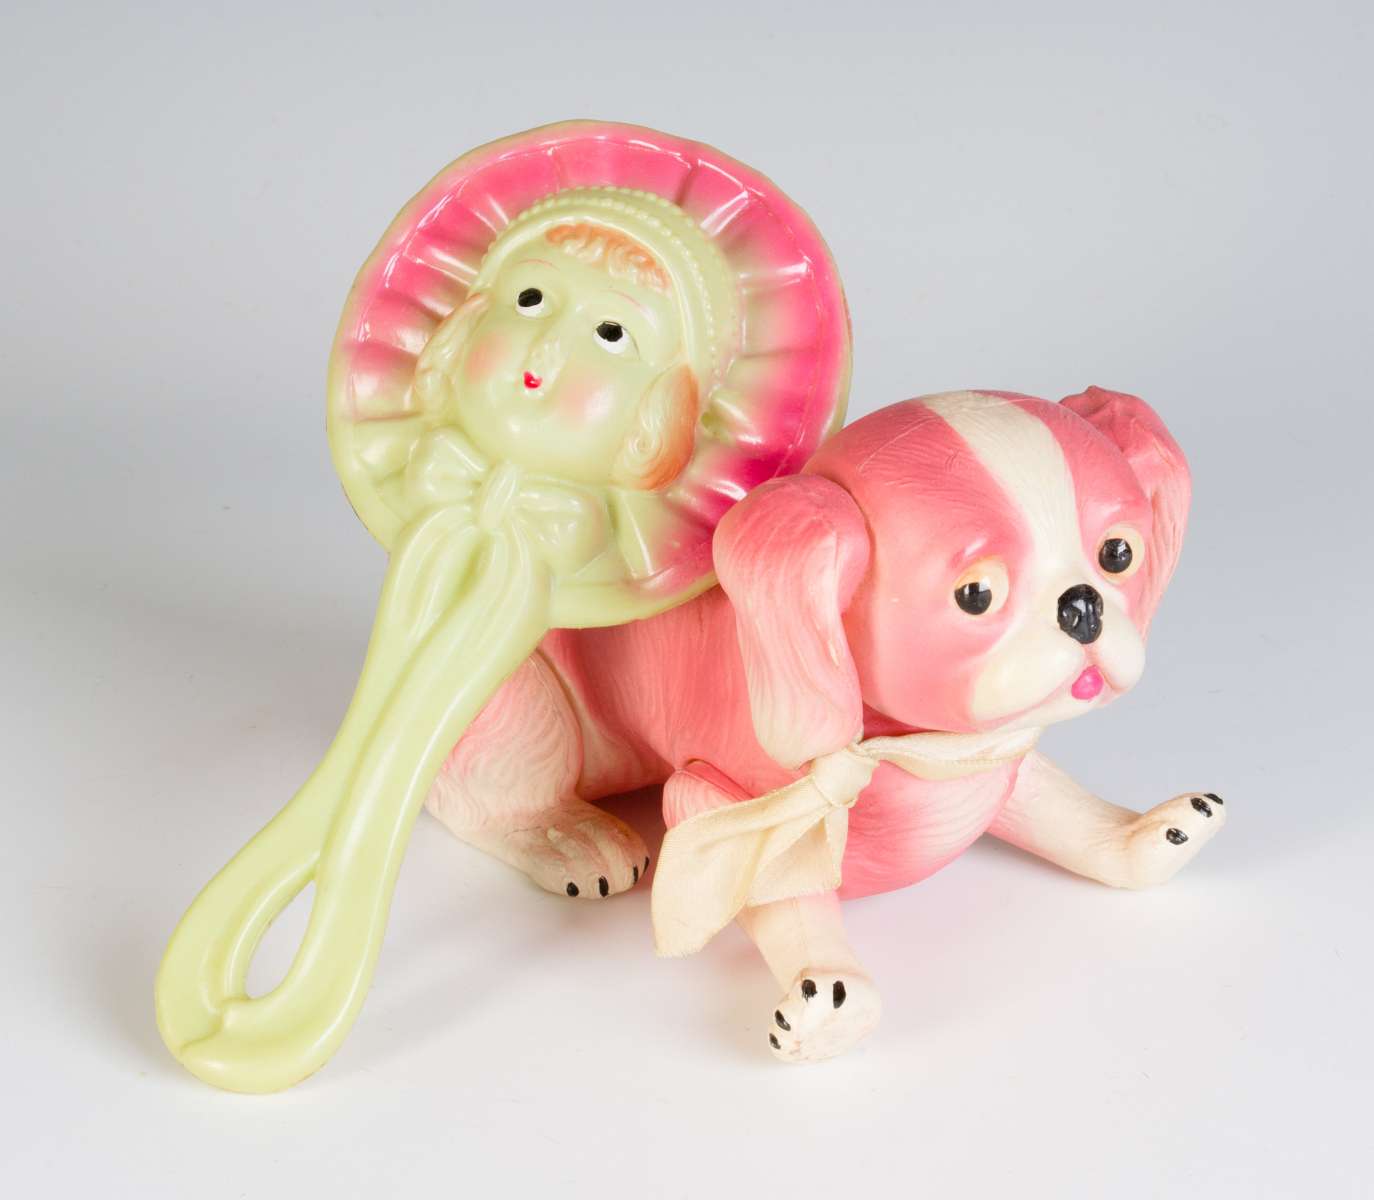 A VINTAGE CELLULOID RATTLE AND DOG FIGURE